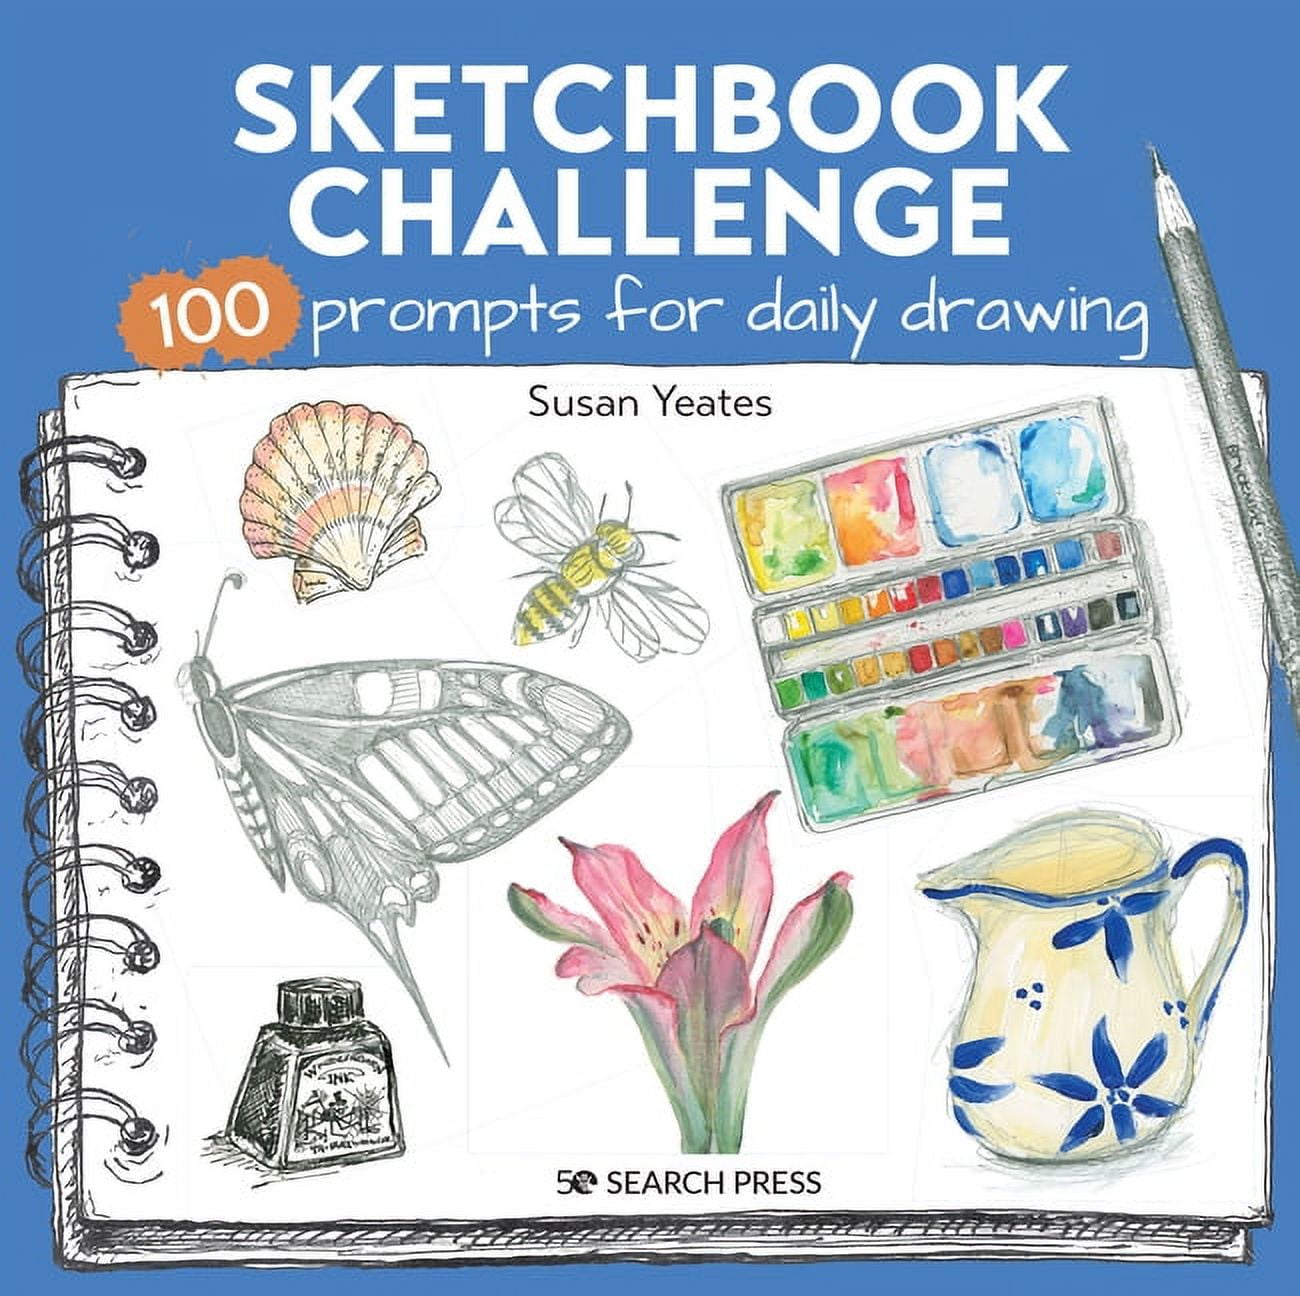 100 Sketchbook Prompts Your Students Will Love - The Art of Education  University